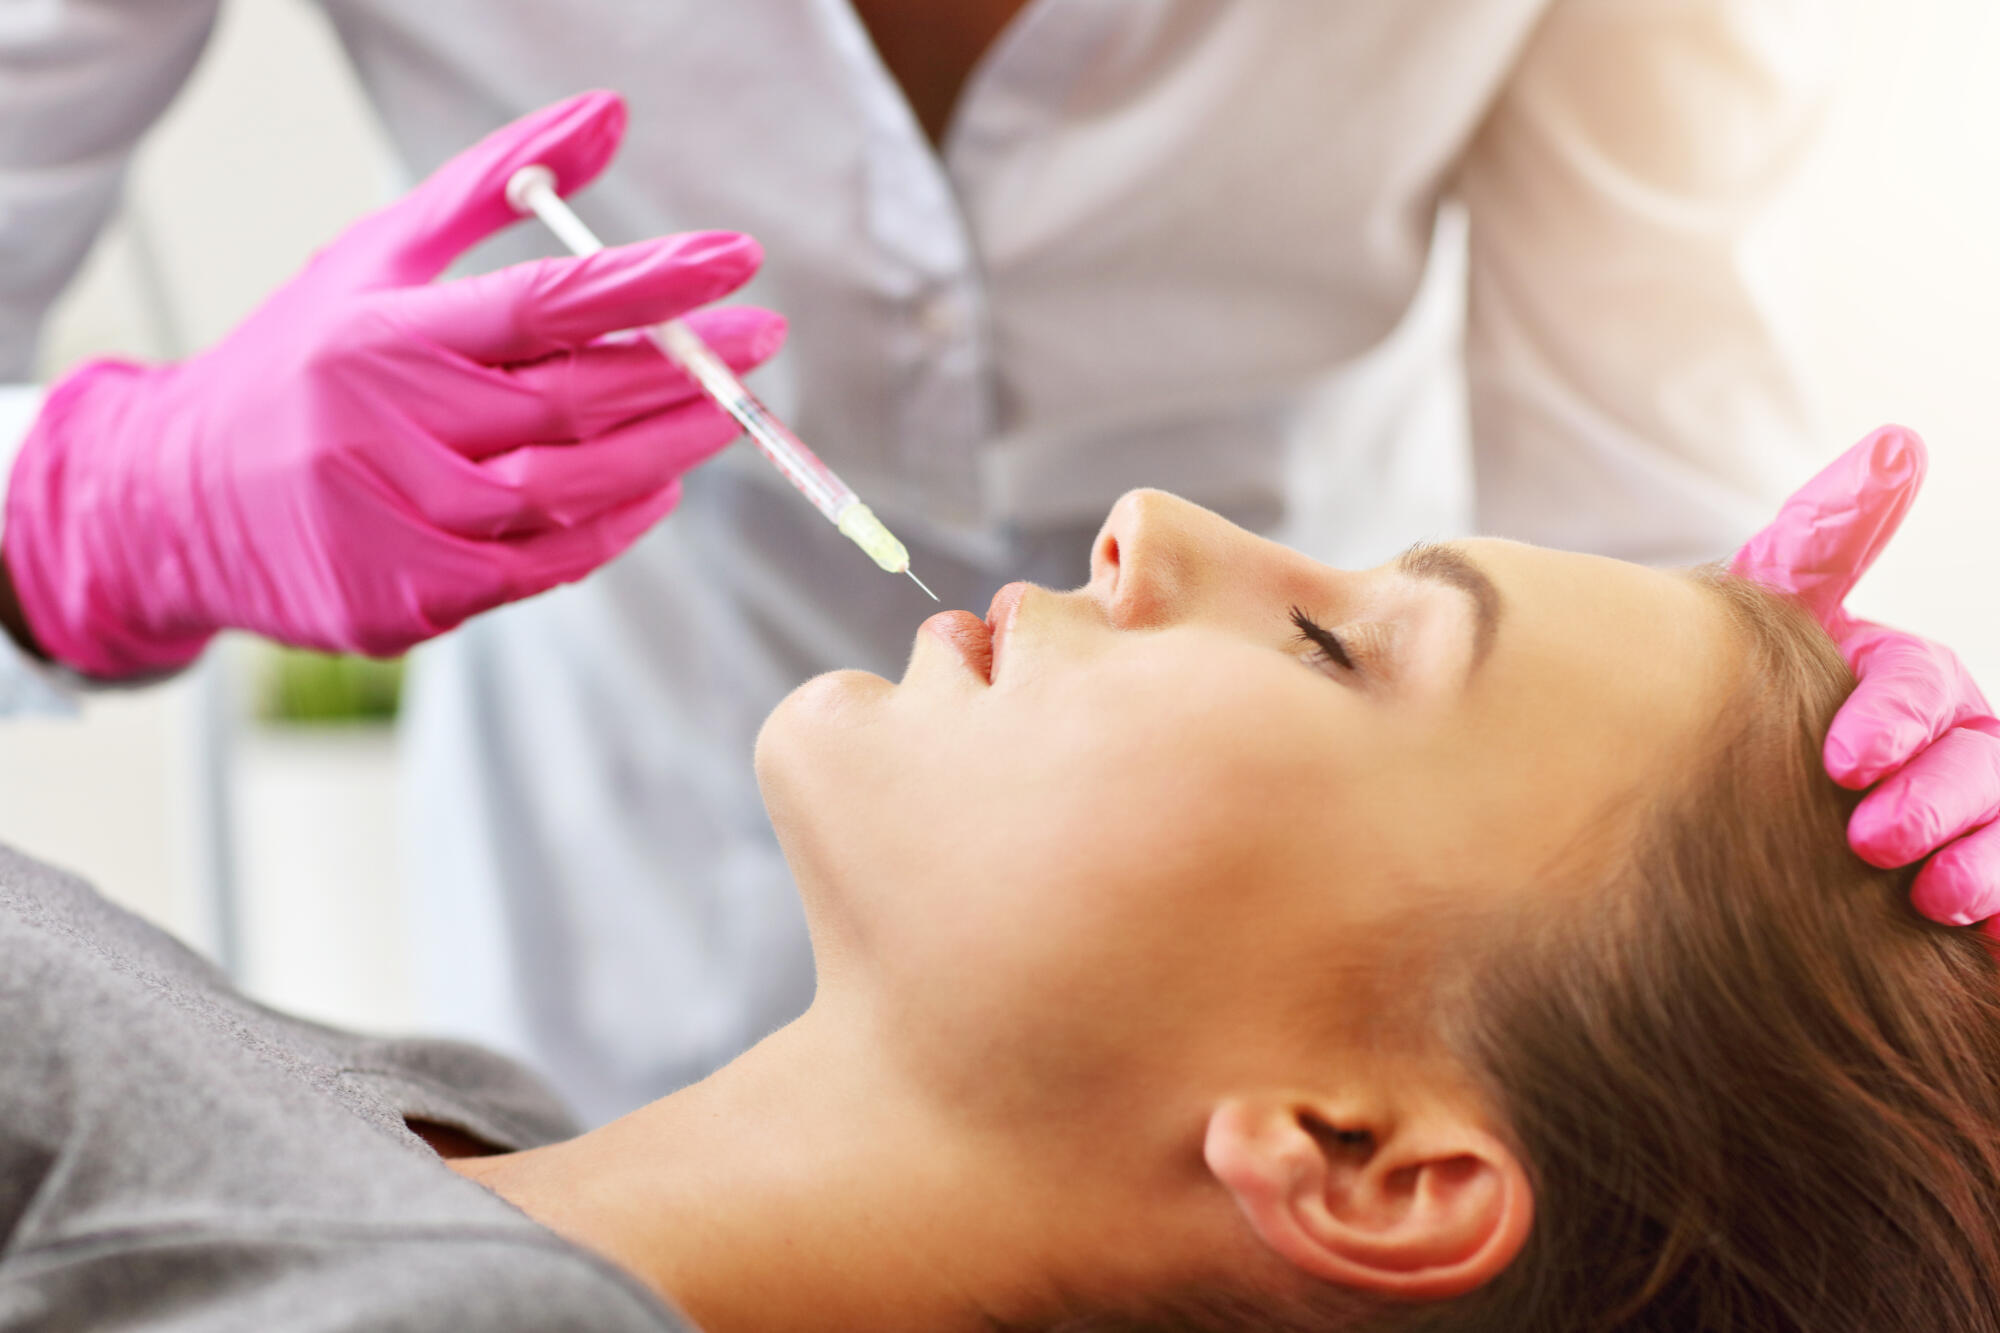 The Long-Term Benefits of Botox on Smile Lines From Prevention to Rejuvenation